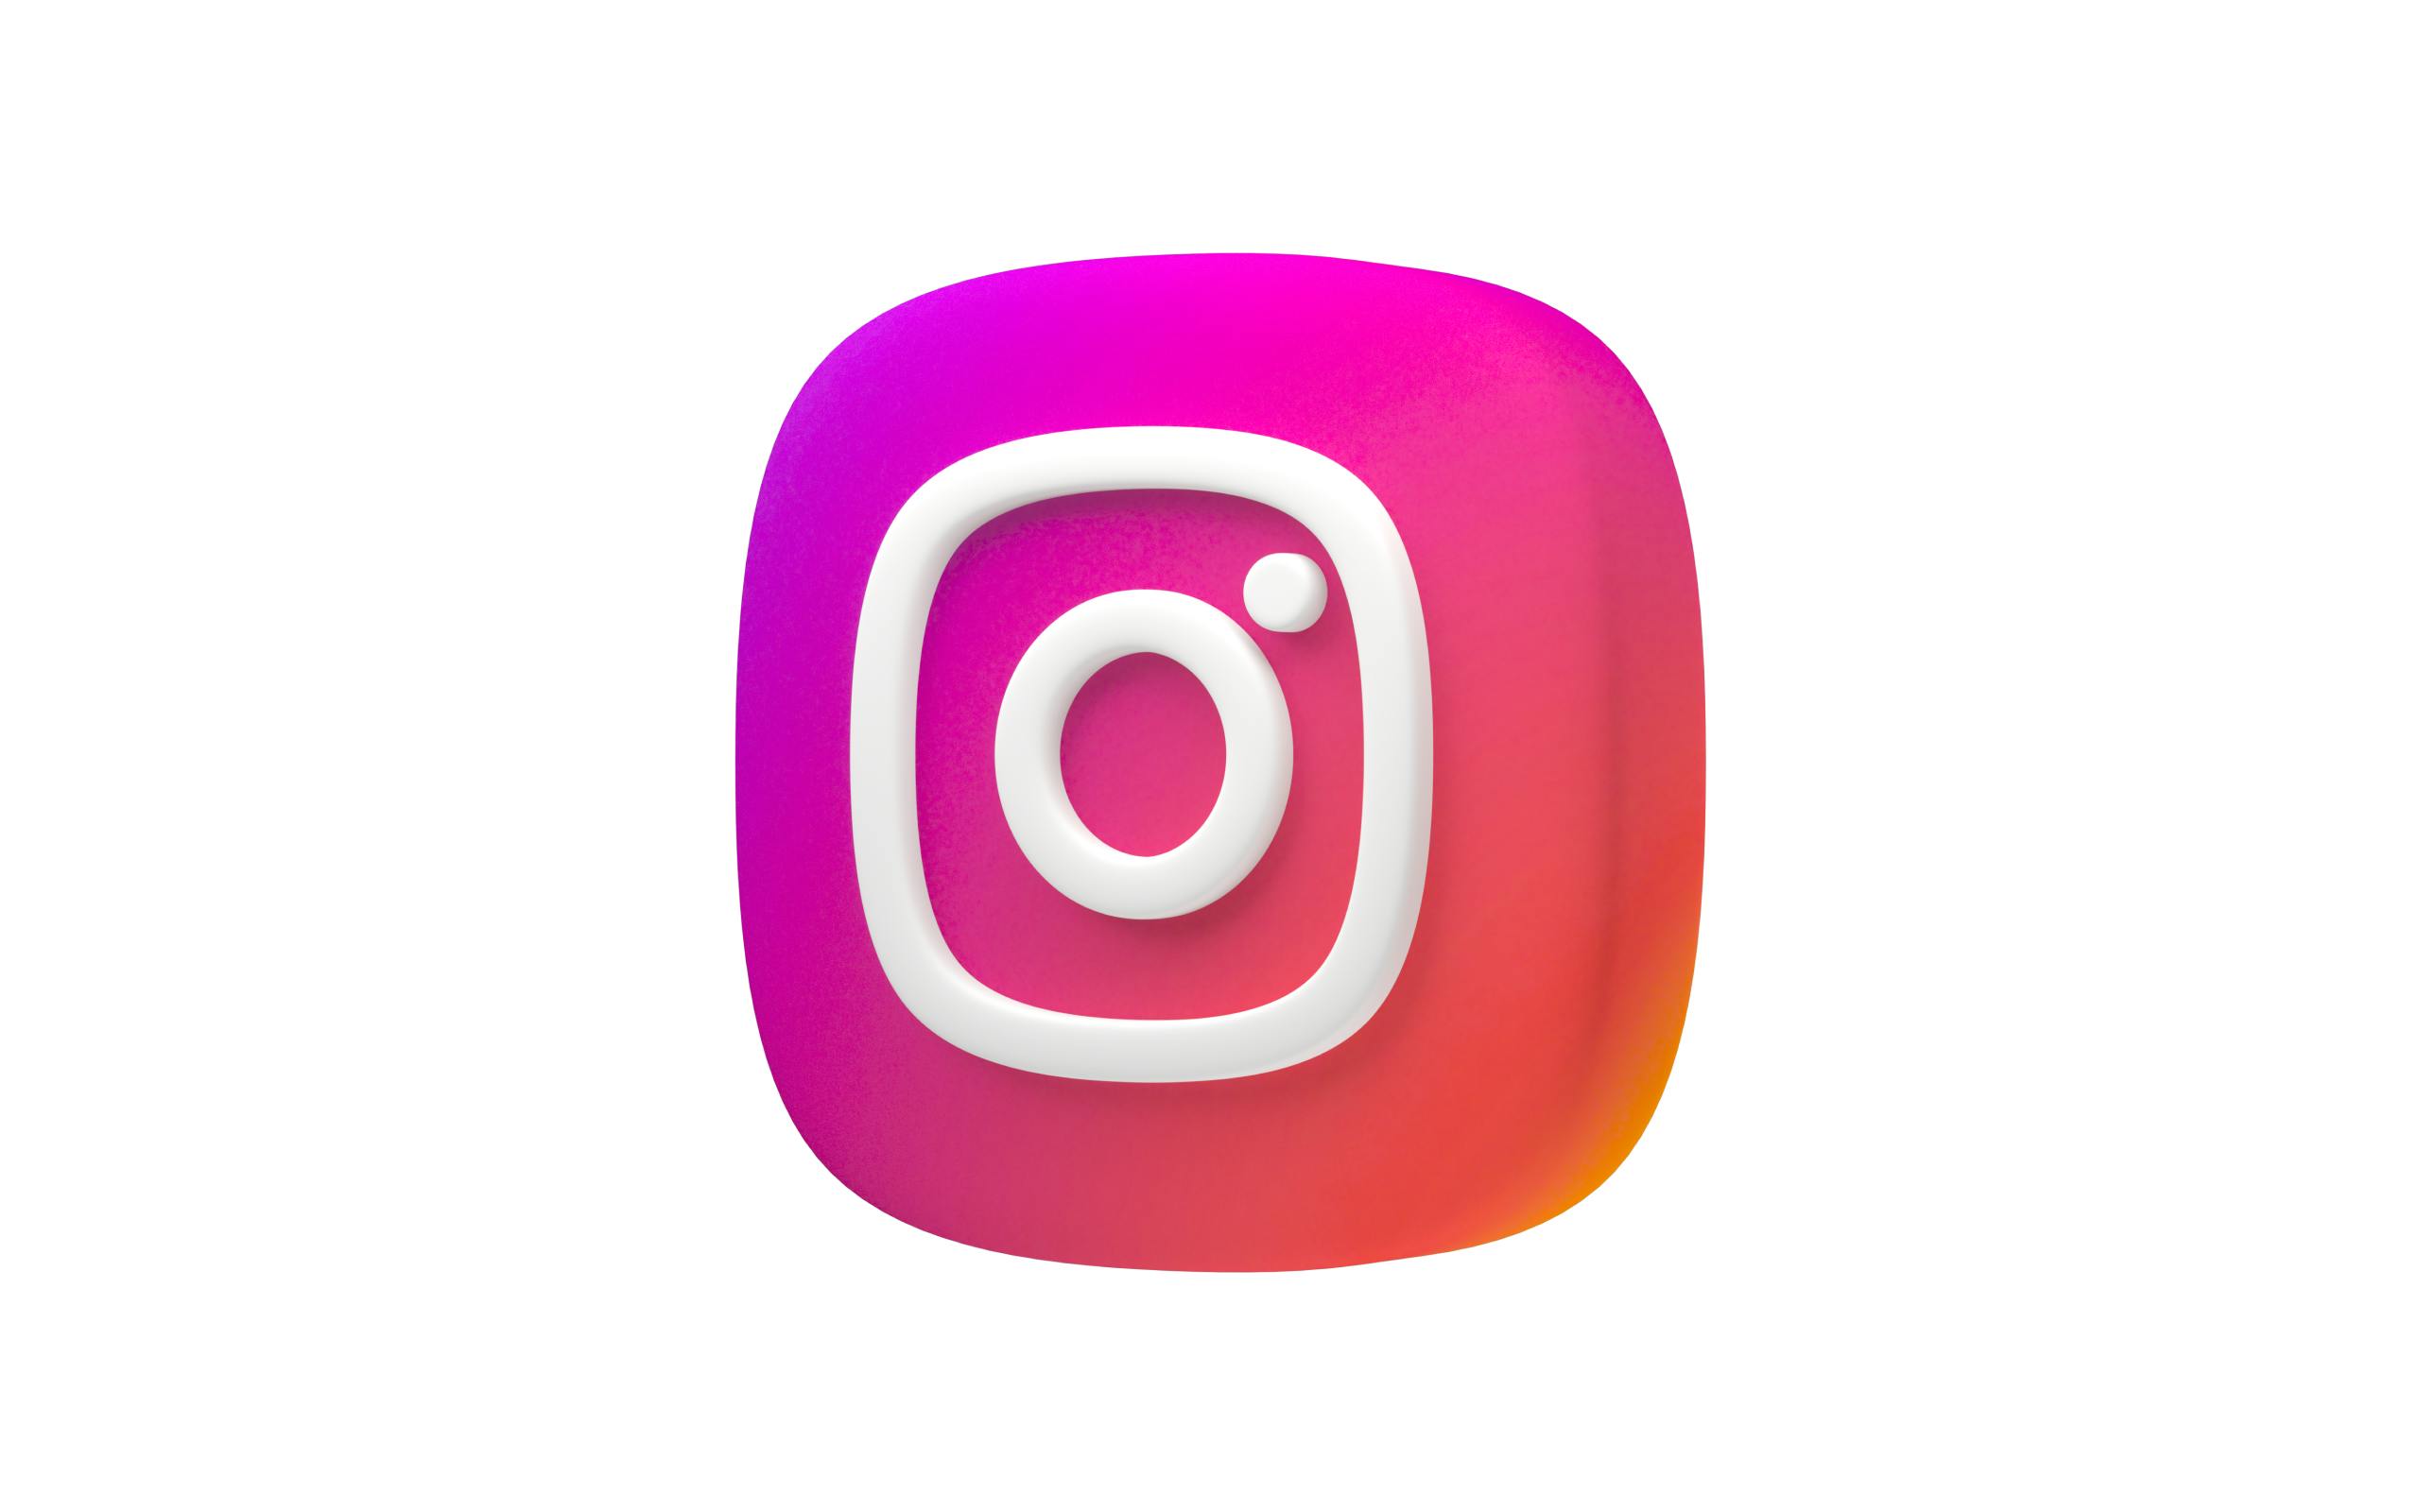 Costs and timeline for building an app like Instagram